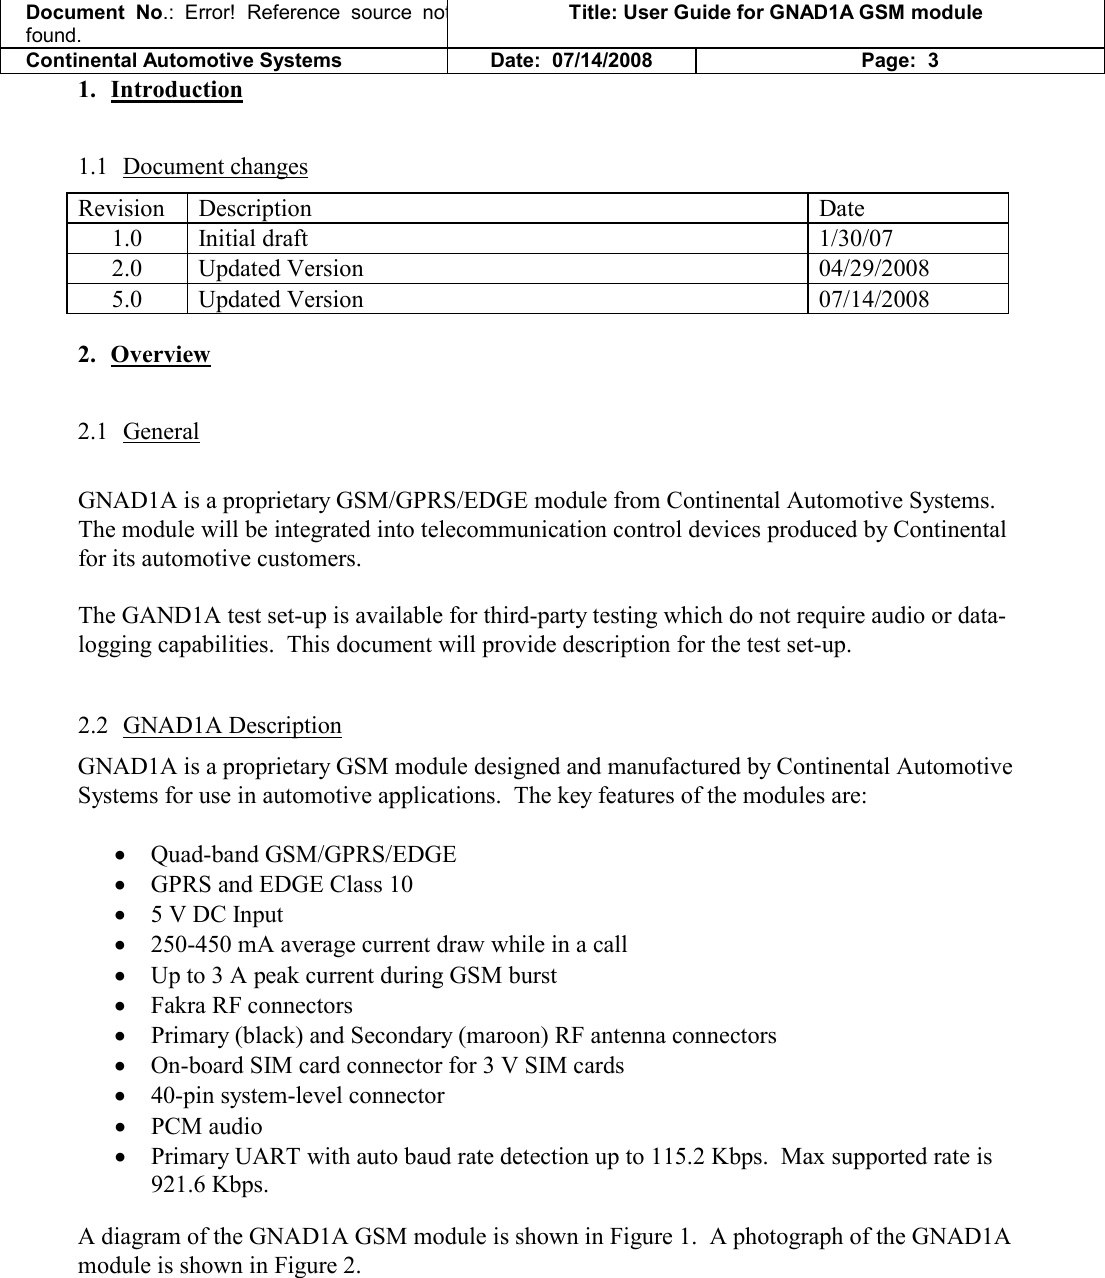 Document  No.: Error!  Reference  source  not found. Title: User Guide for GNAD1A GSM module Continental Automotive Systems Date:  07/14/2008 Page:  3 1. Introduction 1.1 Document changes Revision  Description  Date 1.0  Initial draft  1/30/07 2.0   Updated Version   04/29/2008 5.0  Updated Version  07/14/2008 2. Overview 2.1 General  GNAD1A is a proprietary GSM/GPRS/EDGE module from Continental Automotive Systems.  The module will be integrated into telecommunication control devices produced by Continental for its automotive customers.    The GAND1A test set-up is available for third-party testing which do not require audio or data-logging capabilities.  This document will provide description for the test set-up.    2.2 GNAD1A Description GNAD1A is a proprietary GSM module designed and manufactured by Continental Automotive Systems for use in automotive applications.  The key features of the modules are:  • Quad-band GSM/GPRS/EDGE  • GPRS and EDGE Class 10 • 5 V DC Input • 250-450 mA average current draw while in a call • Up to 3 A peak current during GSM burst • Fakra RF connectors • Primary (black) and Secondary (maroon) RF antenna connectors • On-board SIM card connector for 3 V SIM cards • 40-pin system-level connector • PCM audio  • Primary UART with auto baud rate detection up to 115.2 Kbps.  Max supported rate is 921.6 Kbps.  A diagram of the GNAD1A GSM module is shown in Figure 1.  A photograph of the GNAD1A module is shown in Figure 2.    